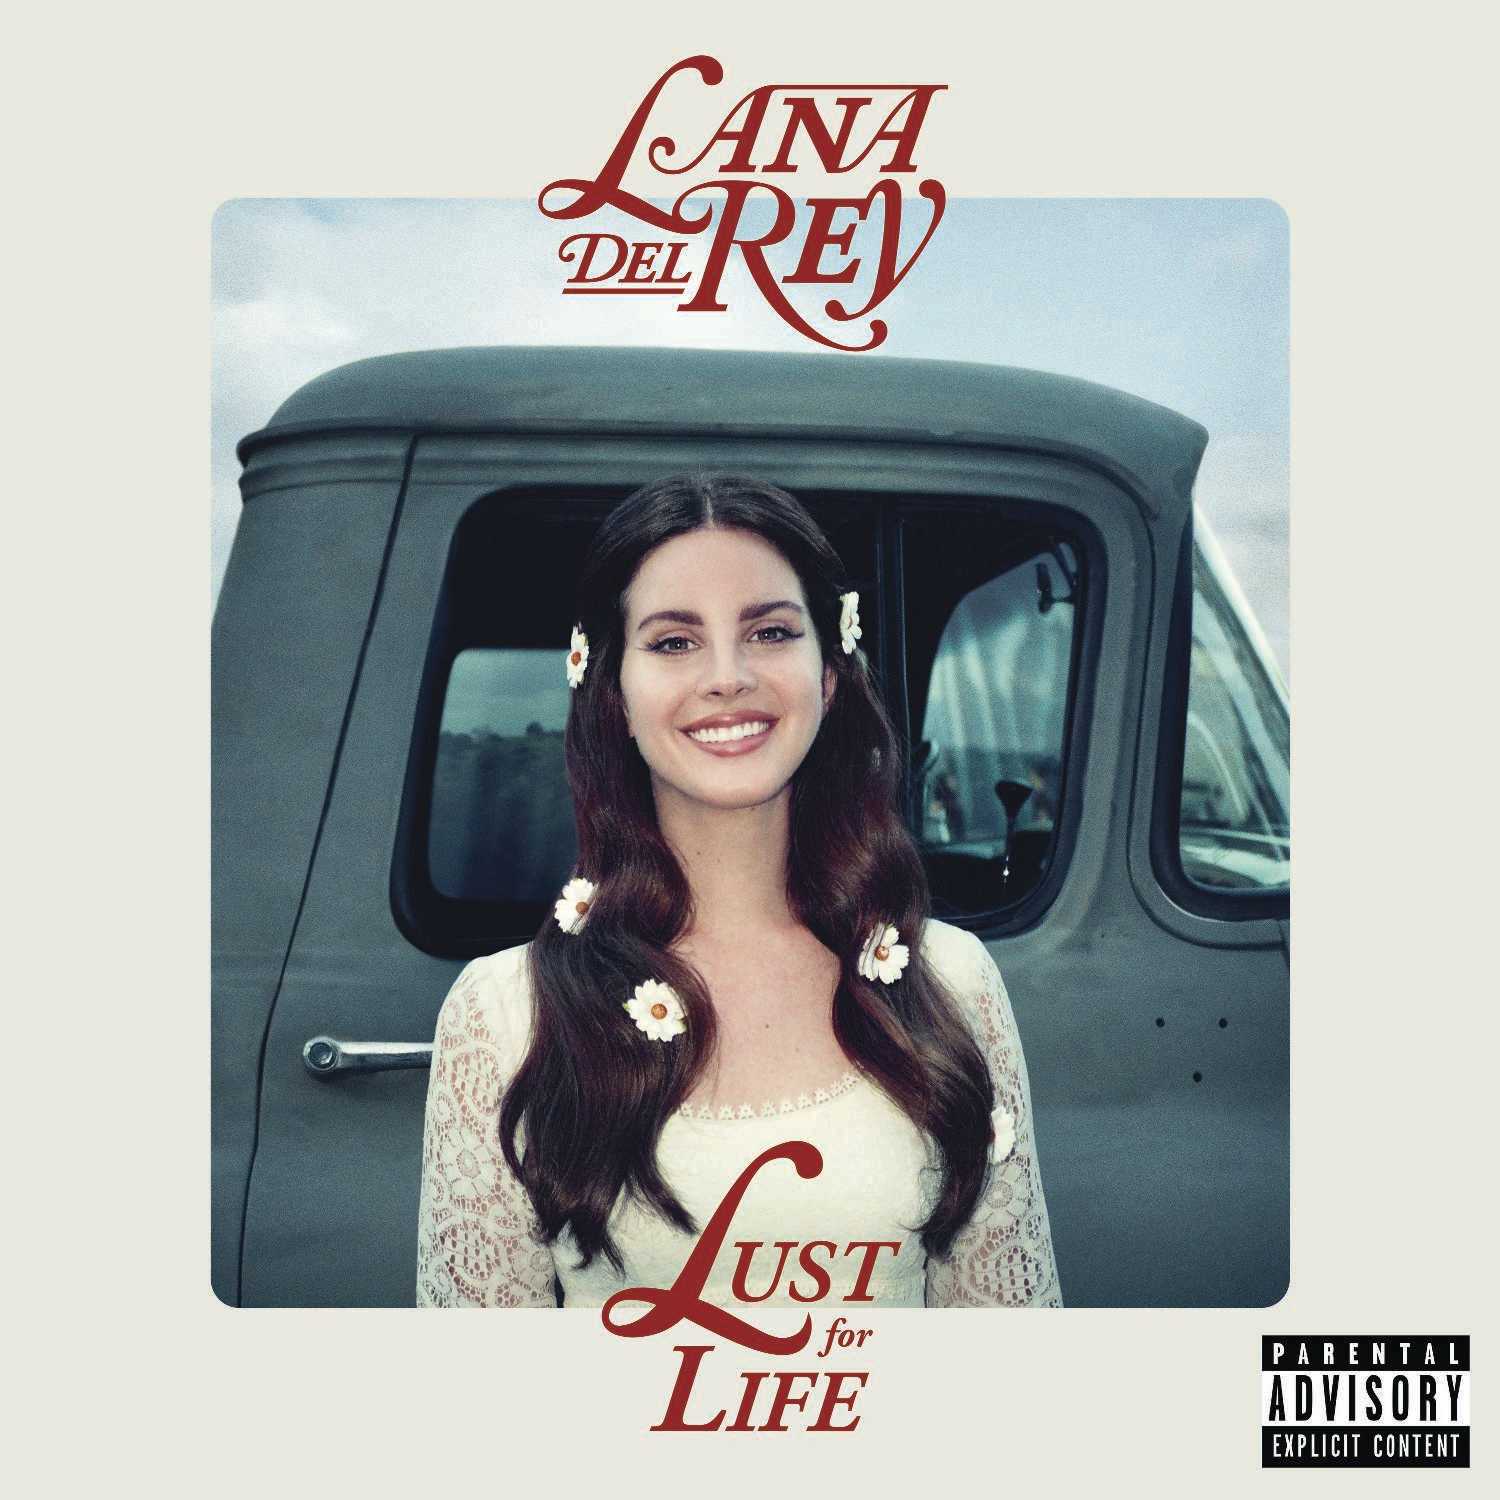 Lana Del Rey: Albums Ranked from Worst to Best